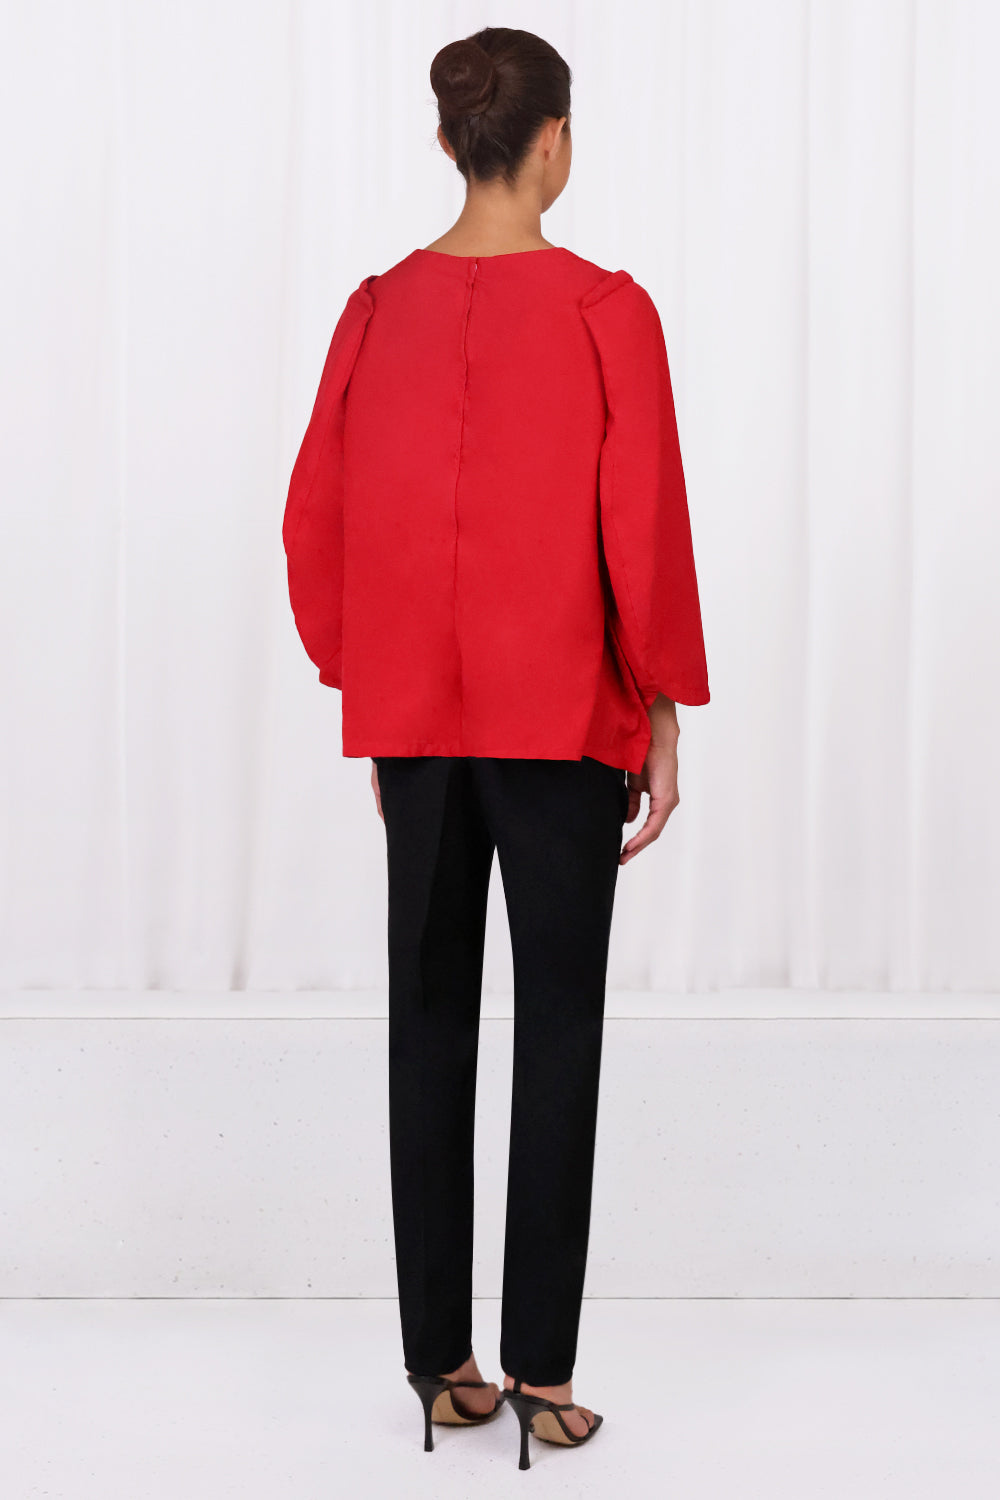 COMME DES GARCONS RTW LAYERED TOP | RED